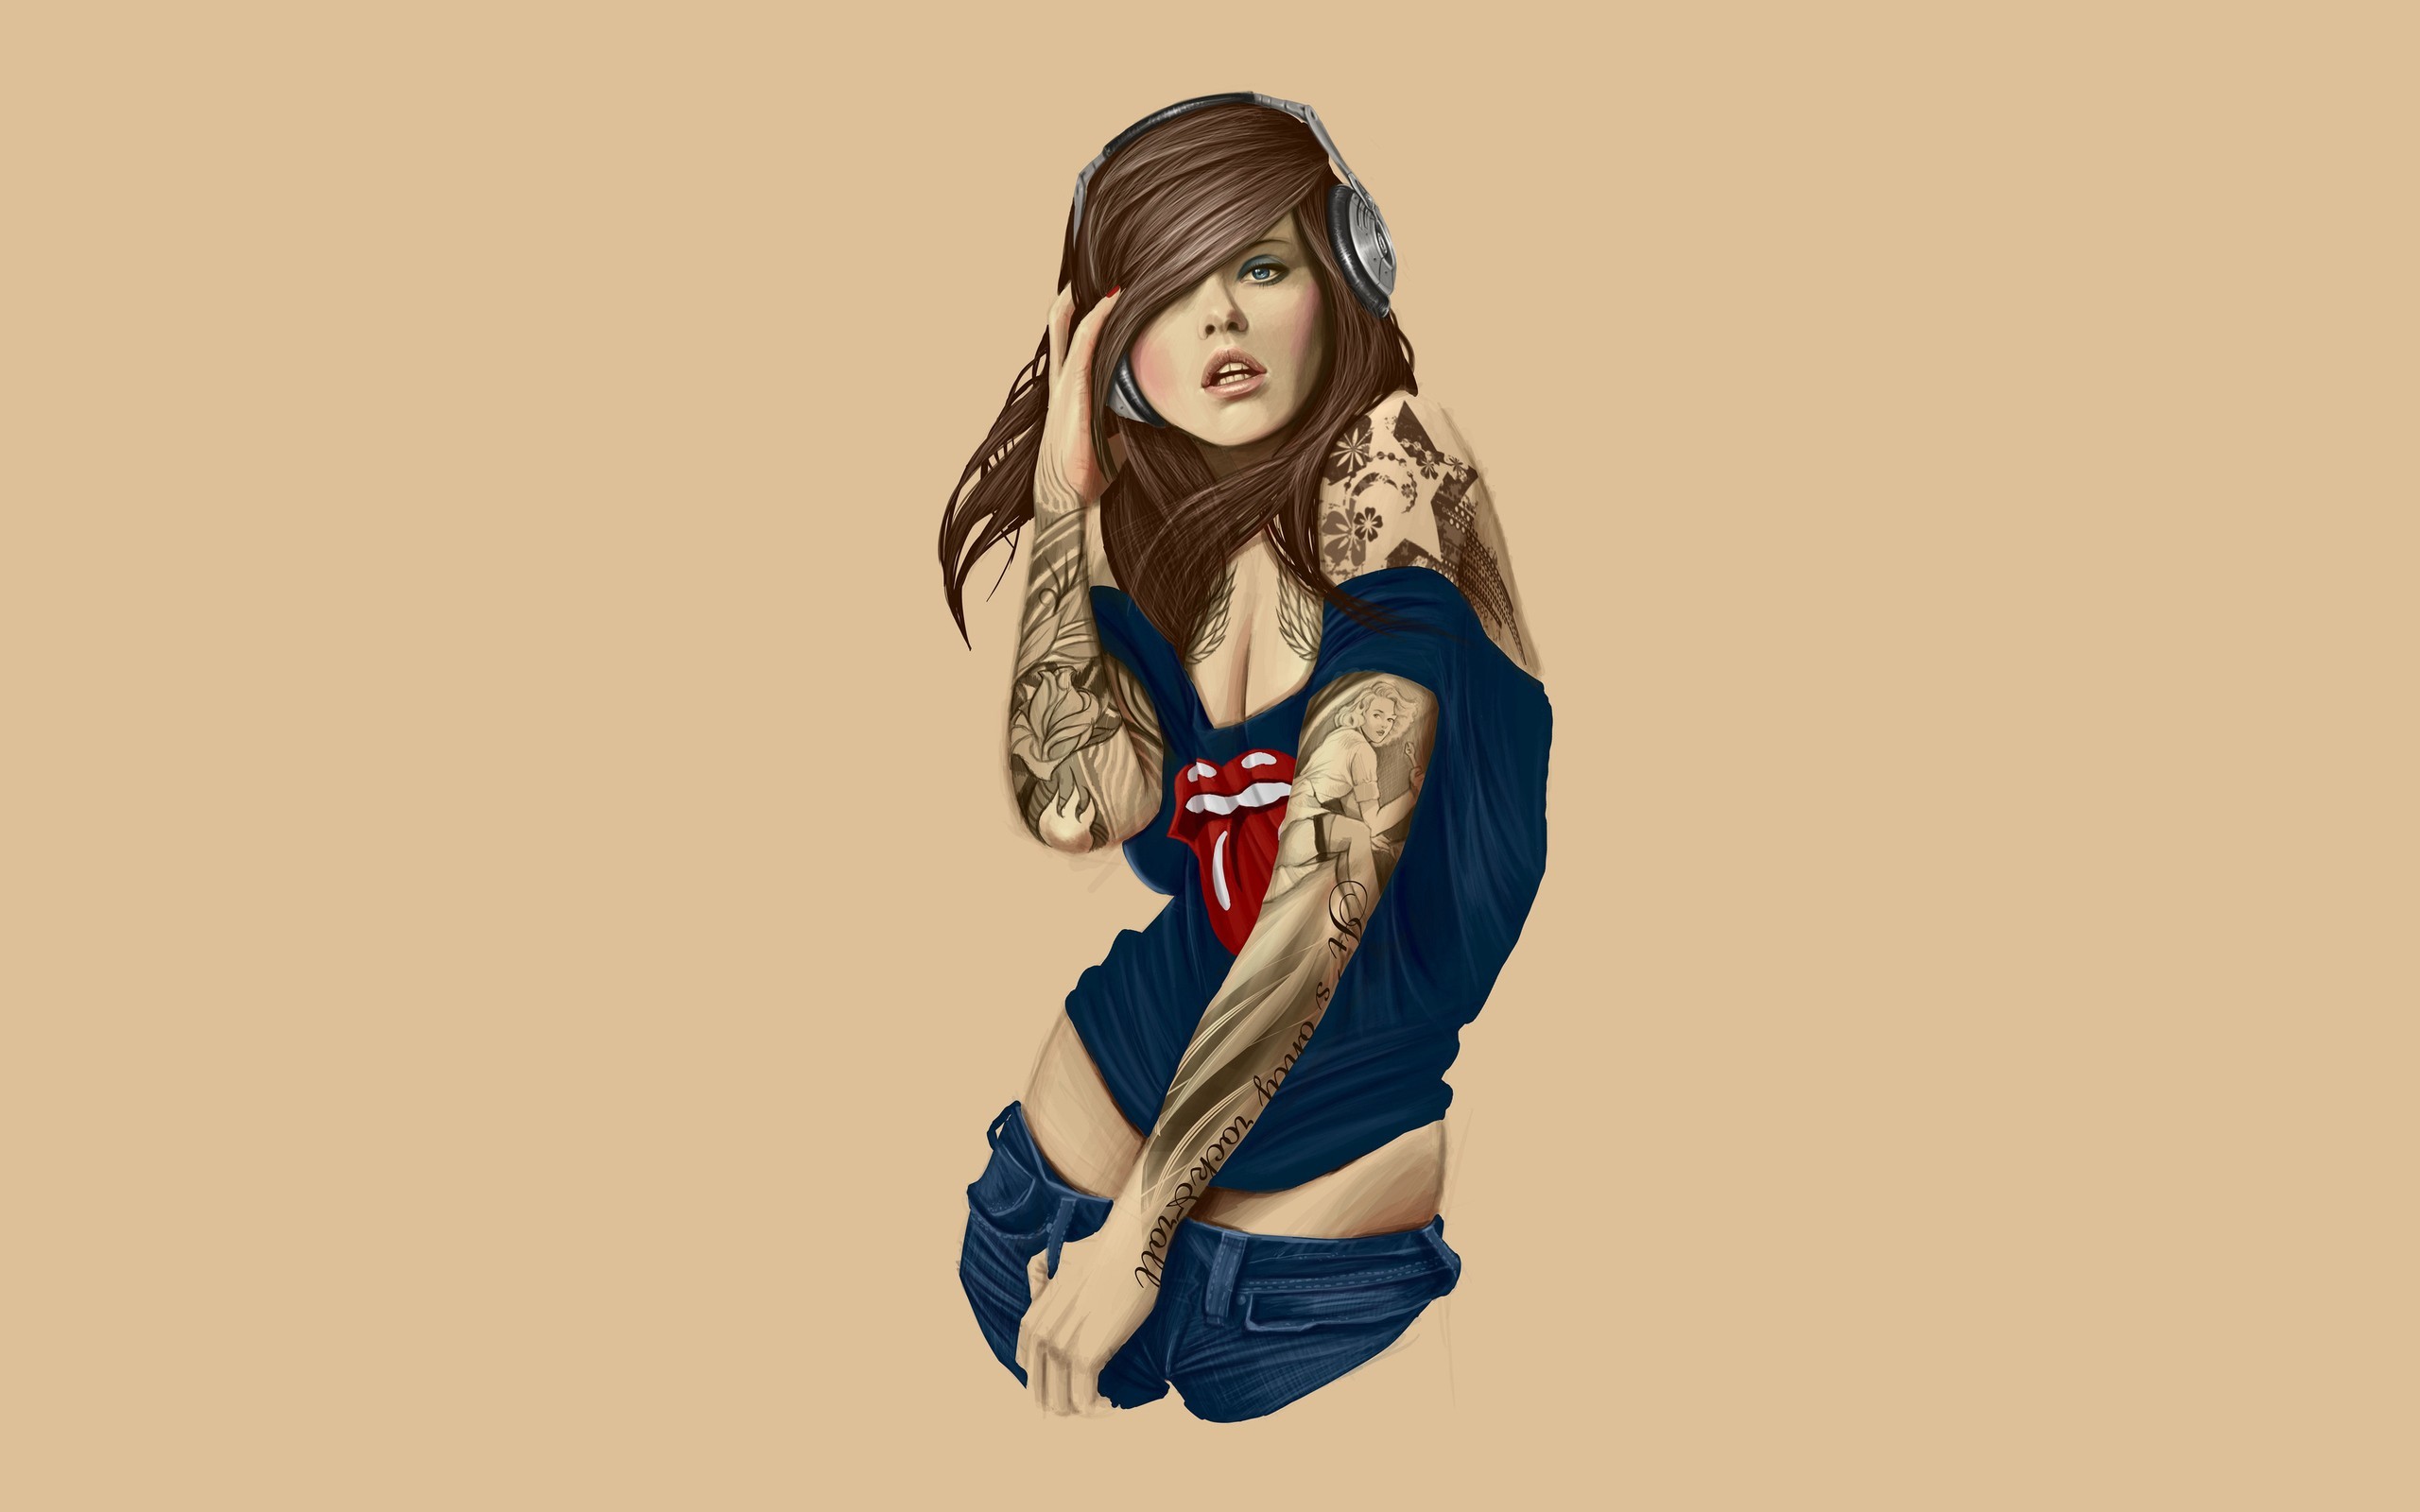 2560x1600 Girl with headphones wearing a Rolling Stones T shirt & tattoos on arms art